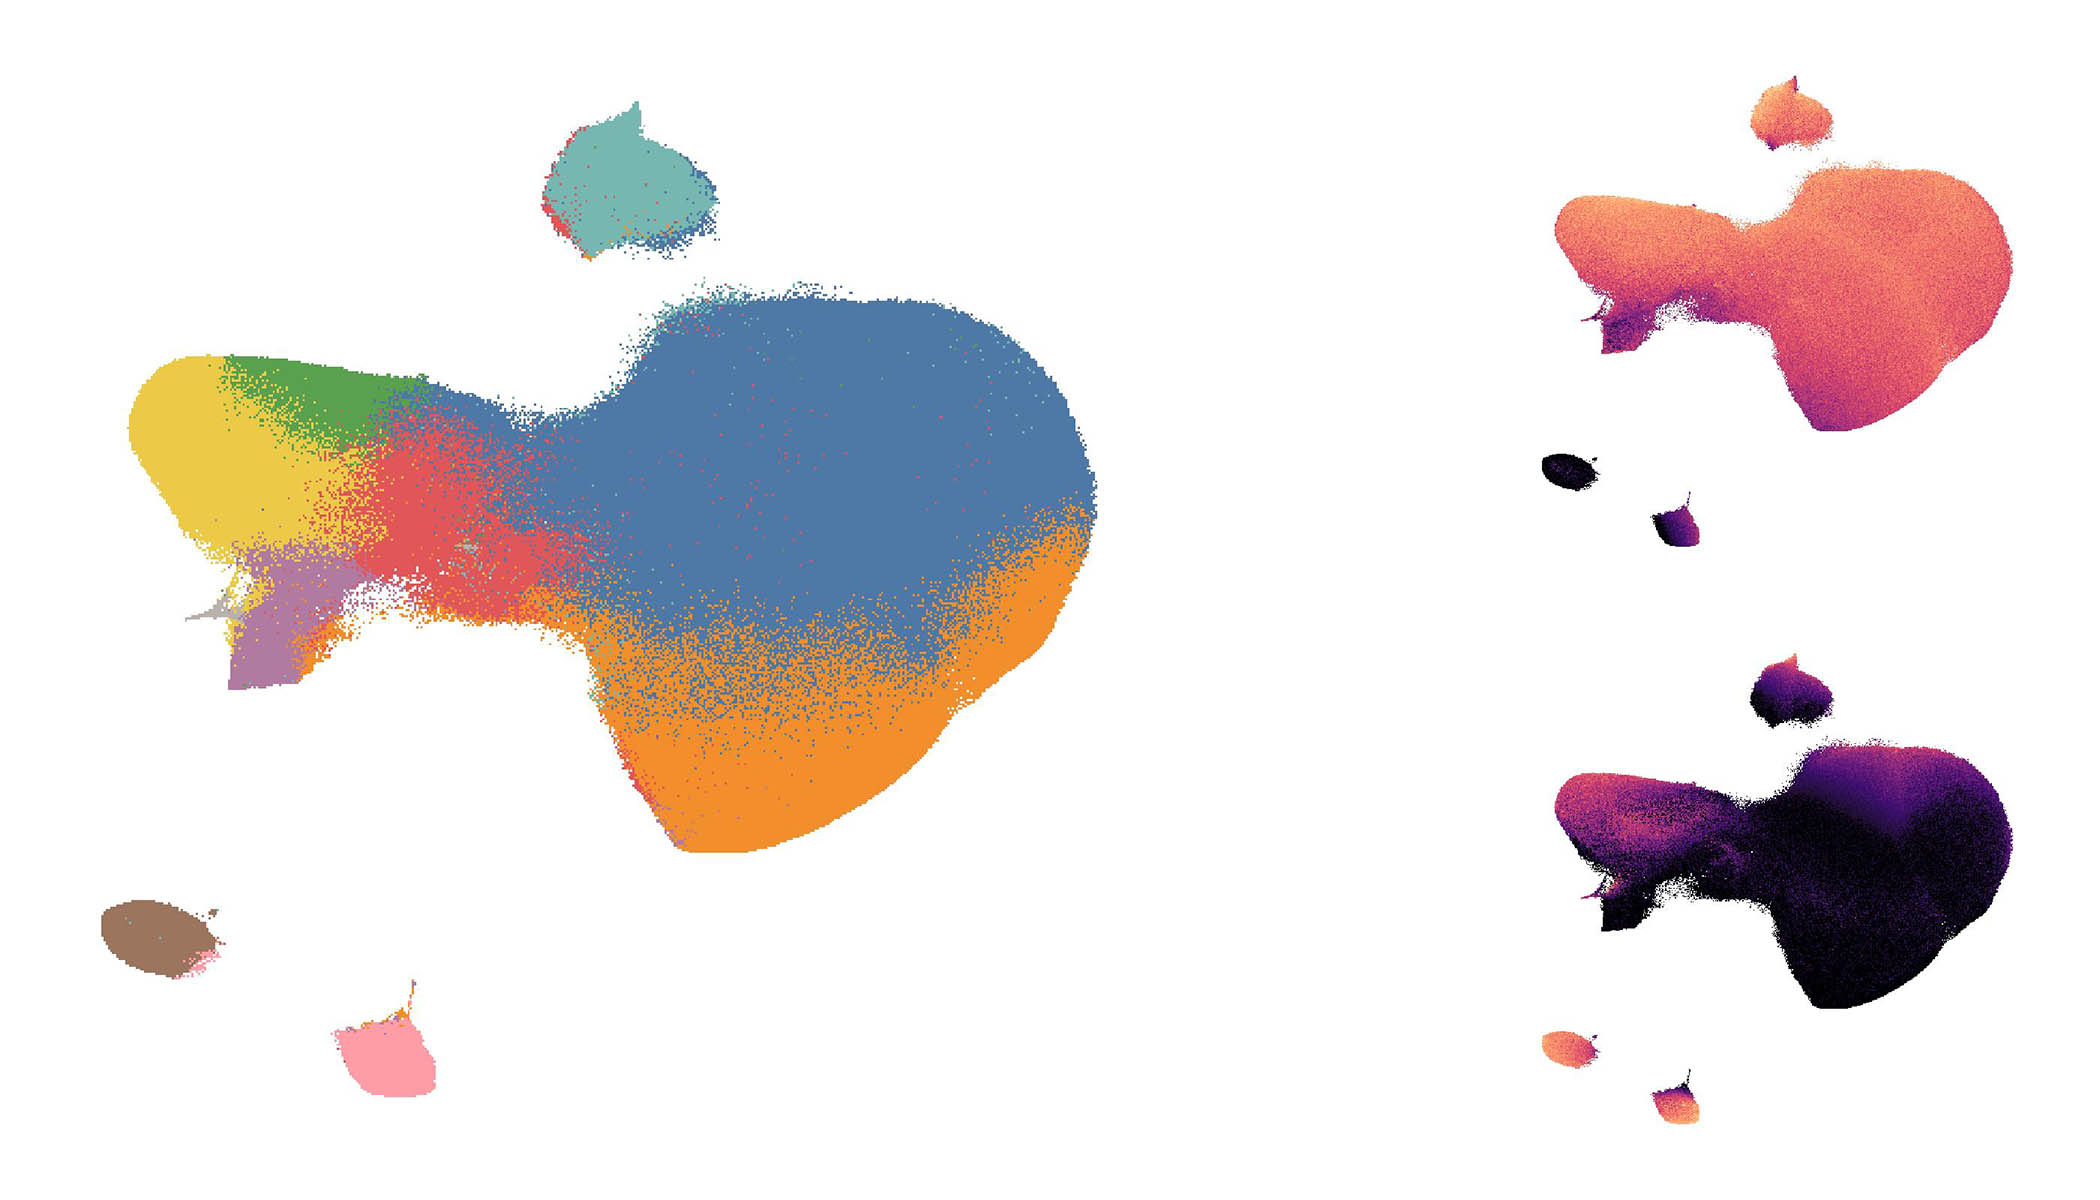 a screenshot showing three multicolored shapes against a white background. On the left is the largest shape comprised of blue, orange, red, green , yellow and purple. On the top right is a shape mainly of coral with some purple near the edges, and on the bottom ride is a shape with gradations of bright purple to dark purple. 